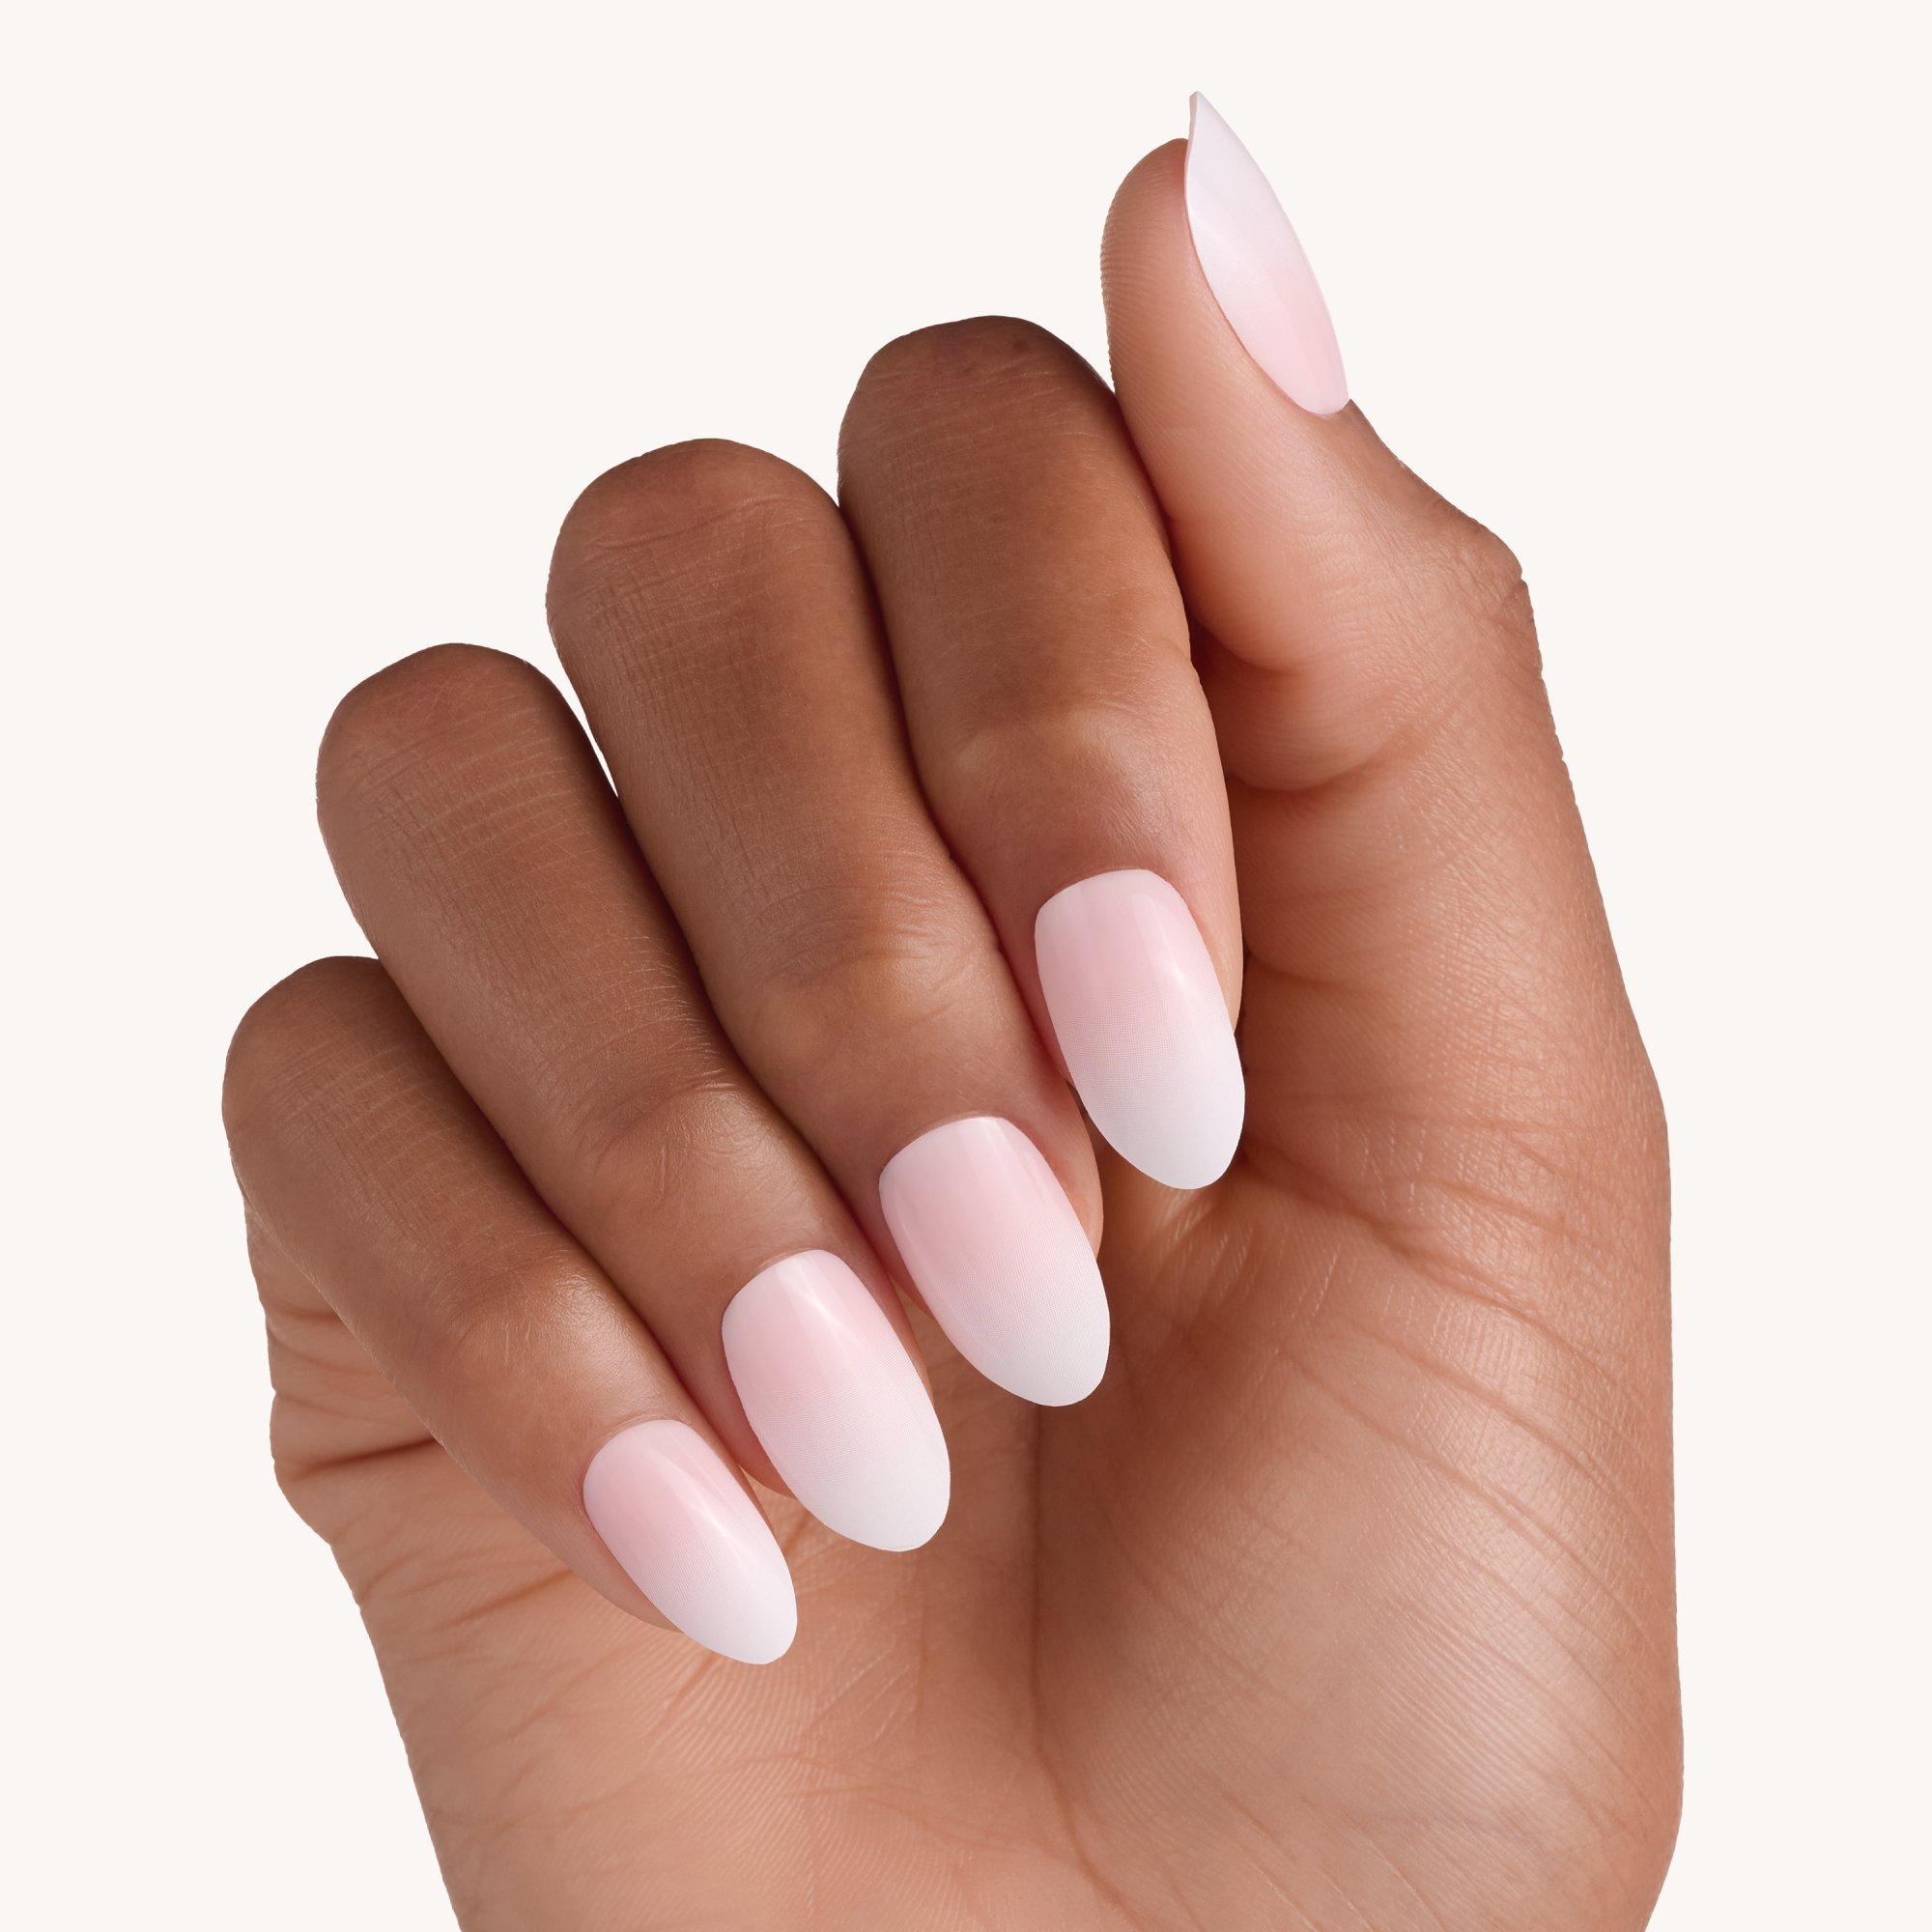 french MANICURE click-on nails